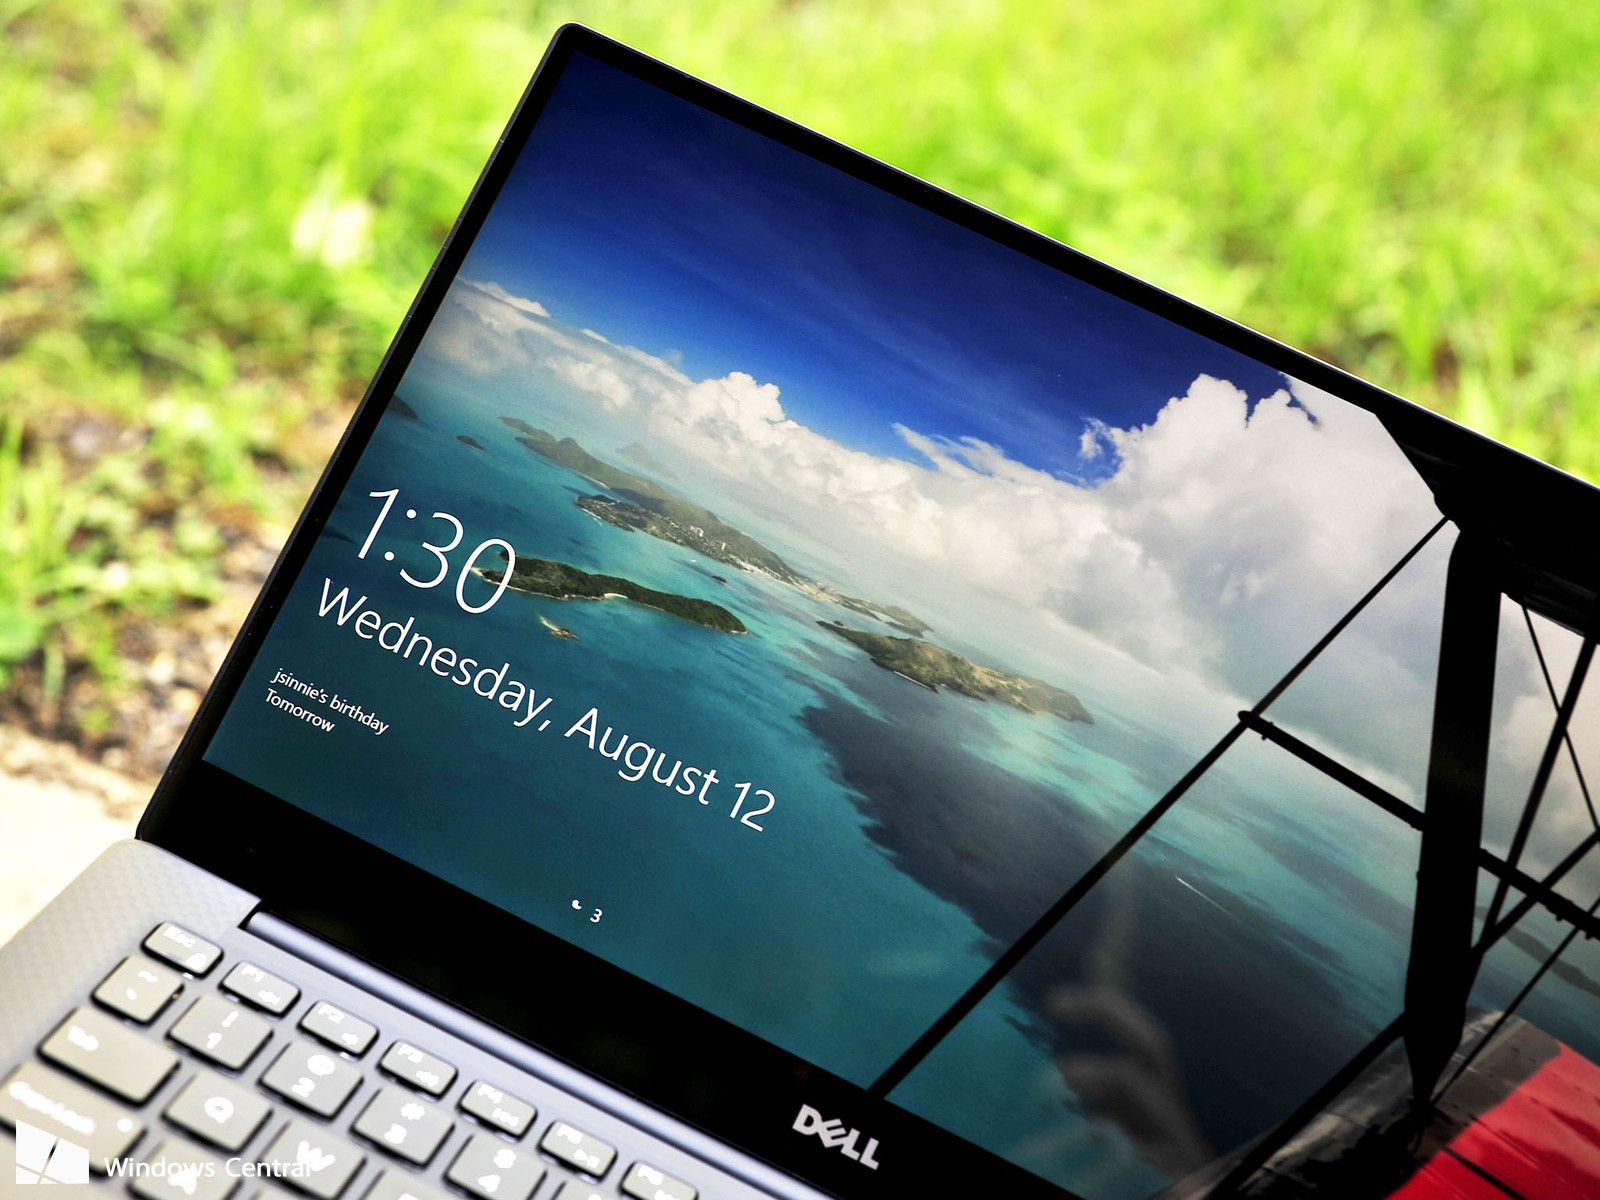 Windows Spotlight lockscreen images so you can use them as wallpapers